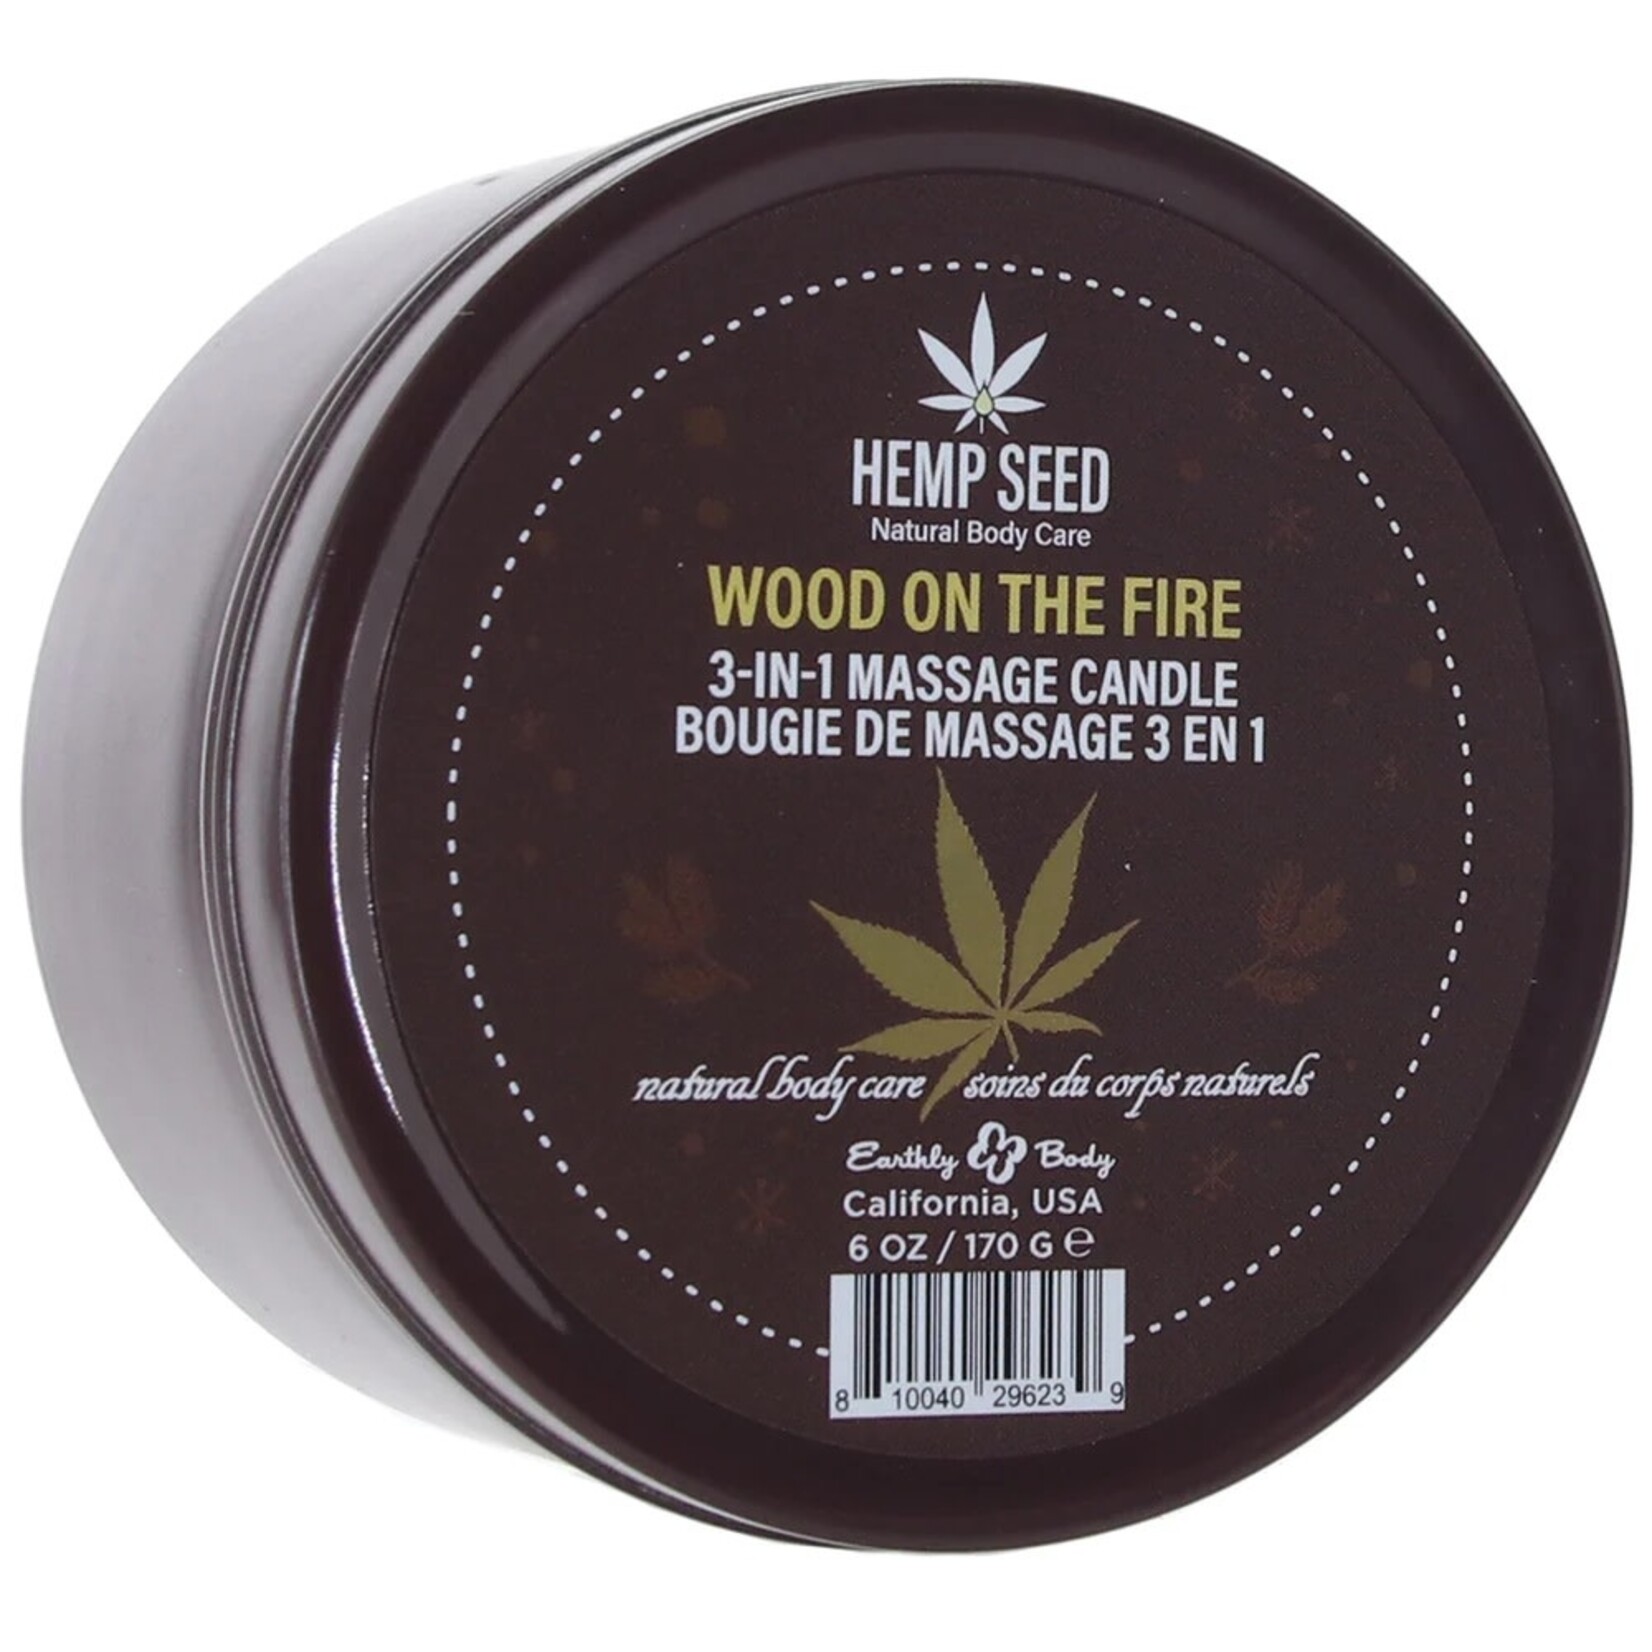 EARTHLY BODY EARTHLY BODY - 3-IN-1 HOLIDAY MASSAGE CANDLE 6OZ IN WOOD ON THE FIRE WOOD ON THE FIRE